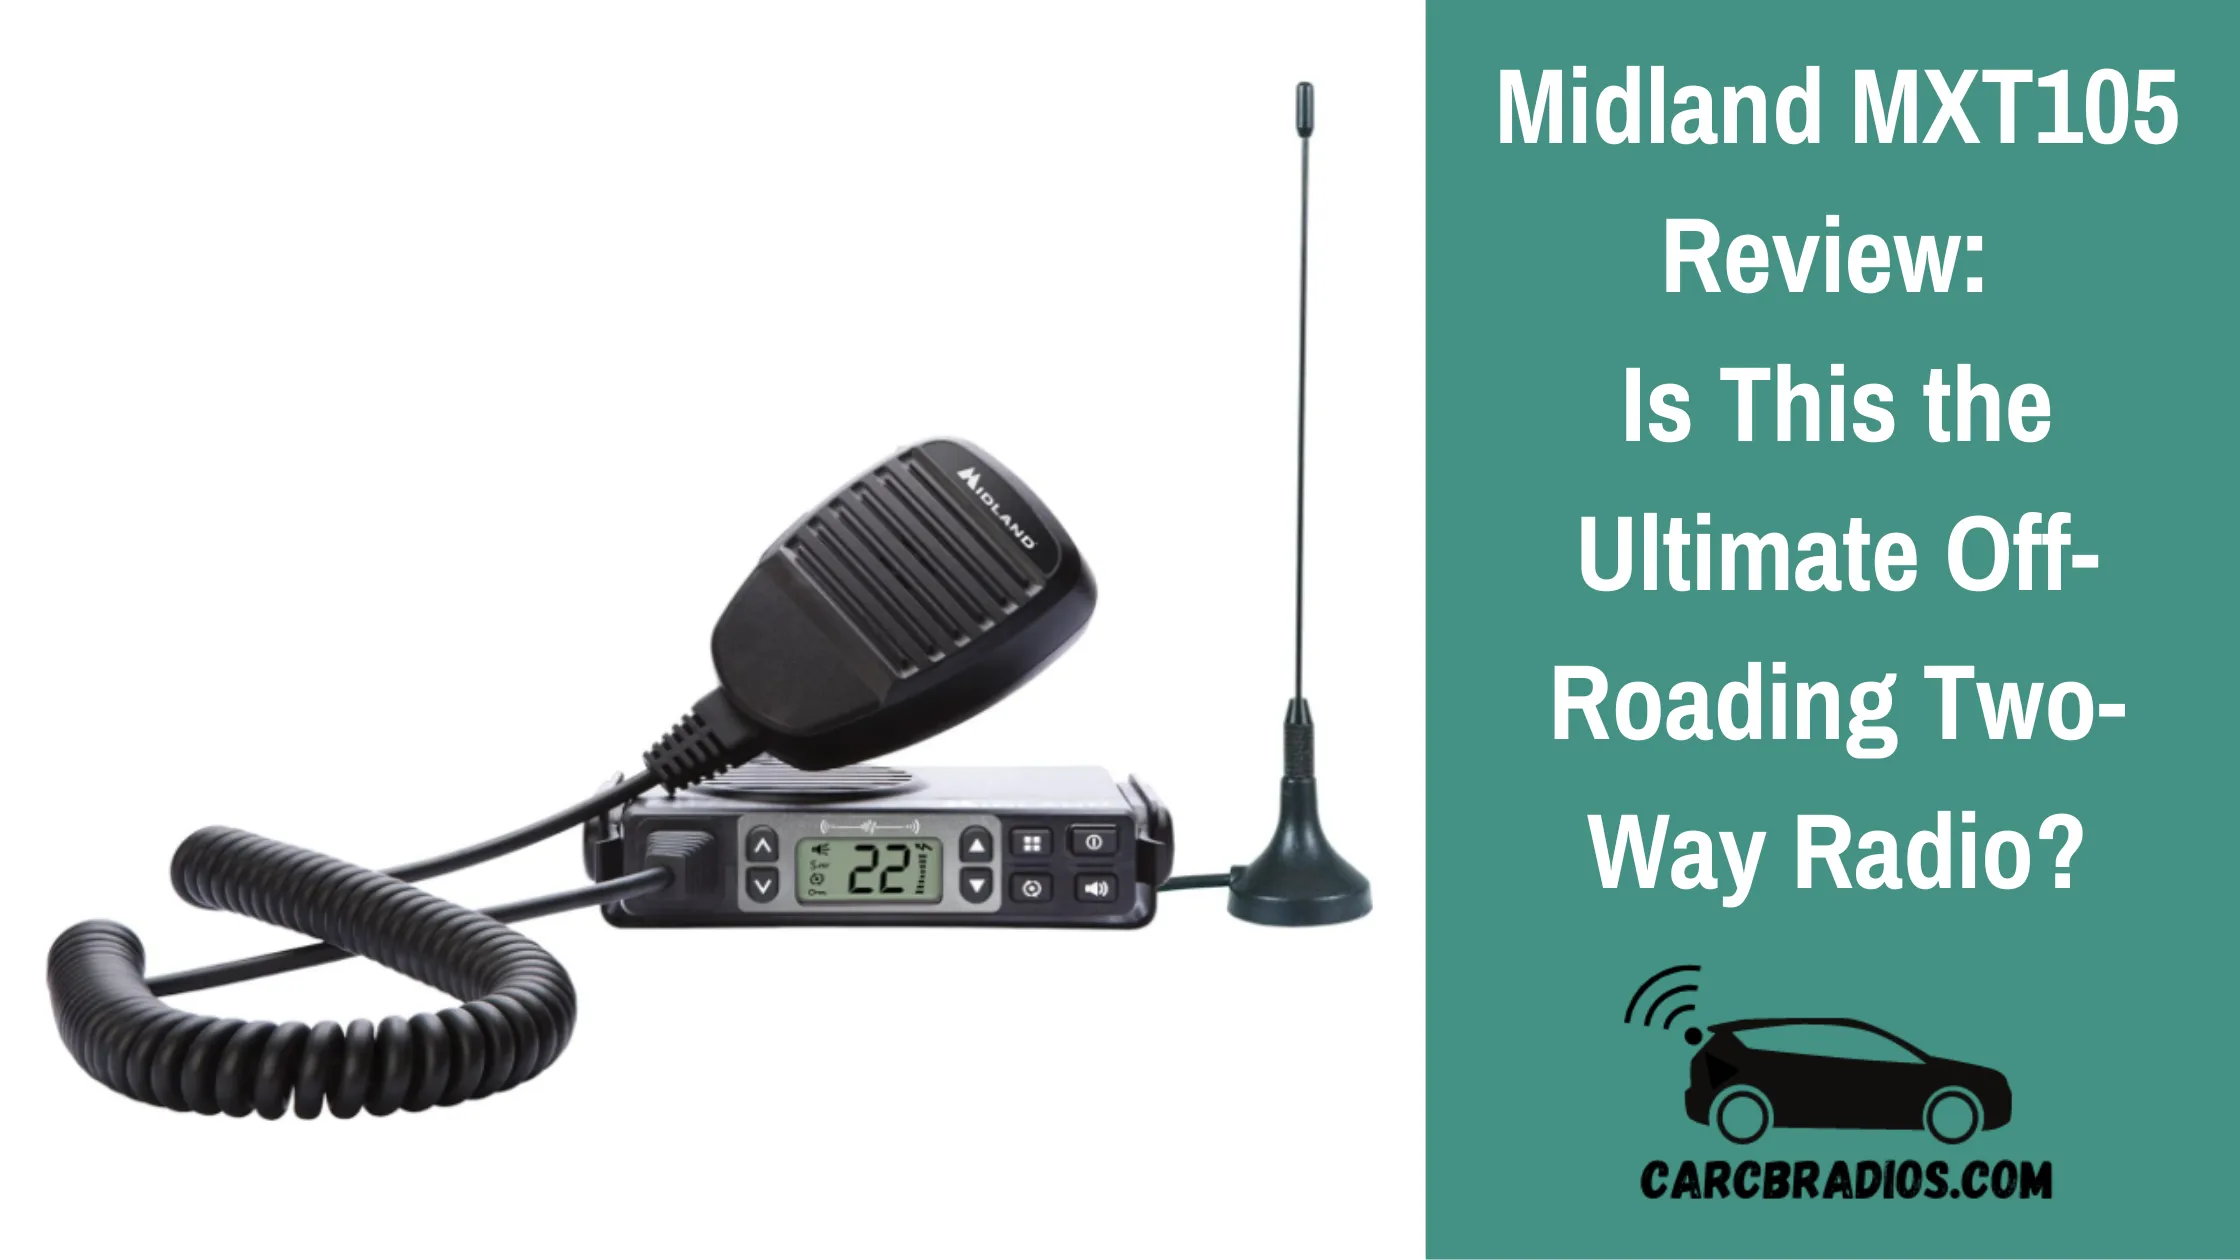 When it comes to two-way radios, the Midland MXT105 MicroMobile is definitely a product worth considering. This device is perfect for those who enjoy outdoor activities such as camping, hiking, hunting, and off-roading, but it can also be used for business purposes. The MicroMobile is compact, easy to use, and comes with a range of features that make it a convenient tool for communicating on the go.